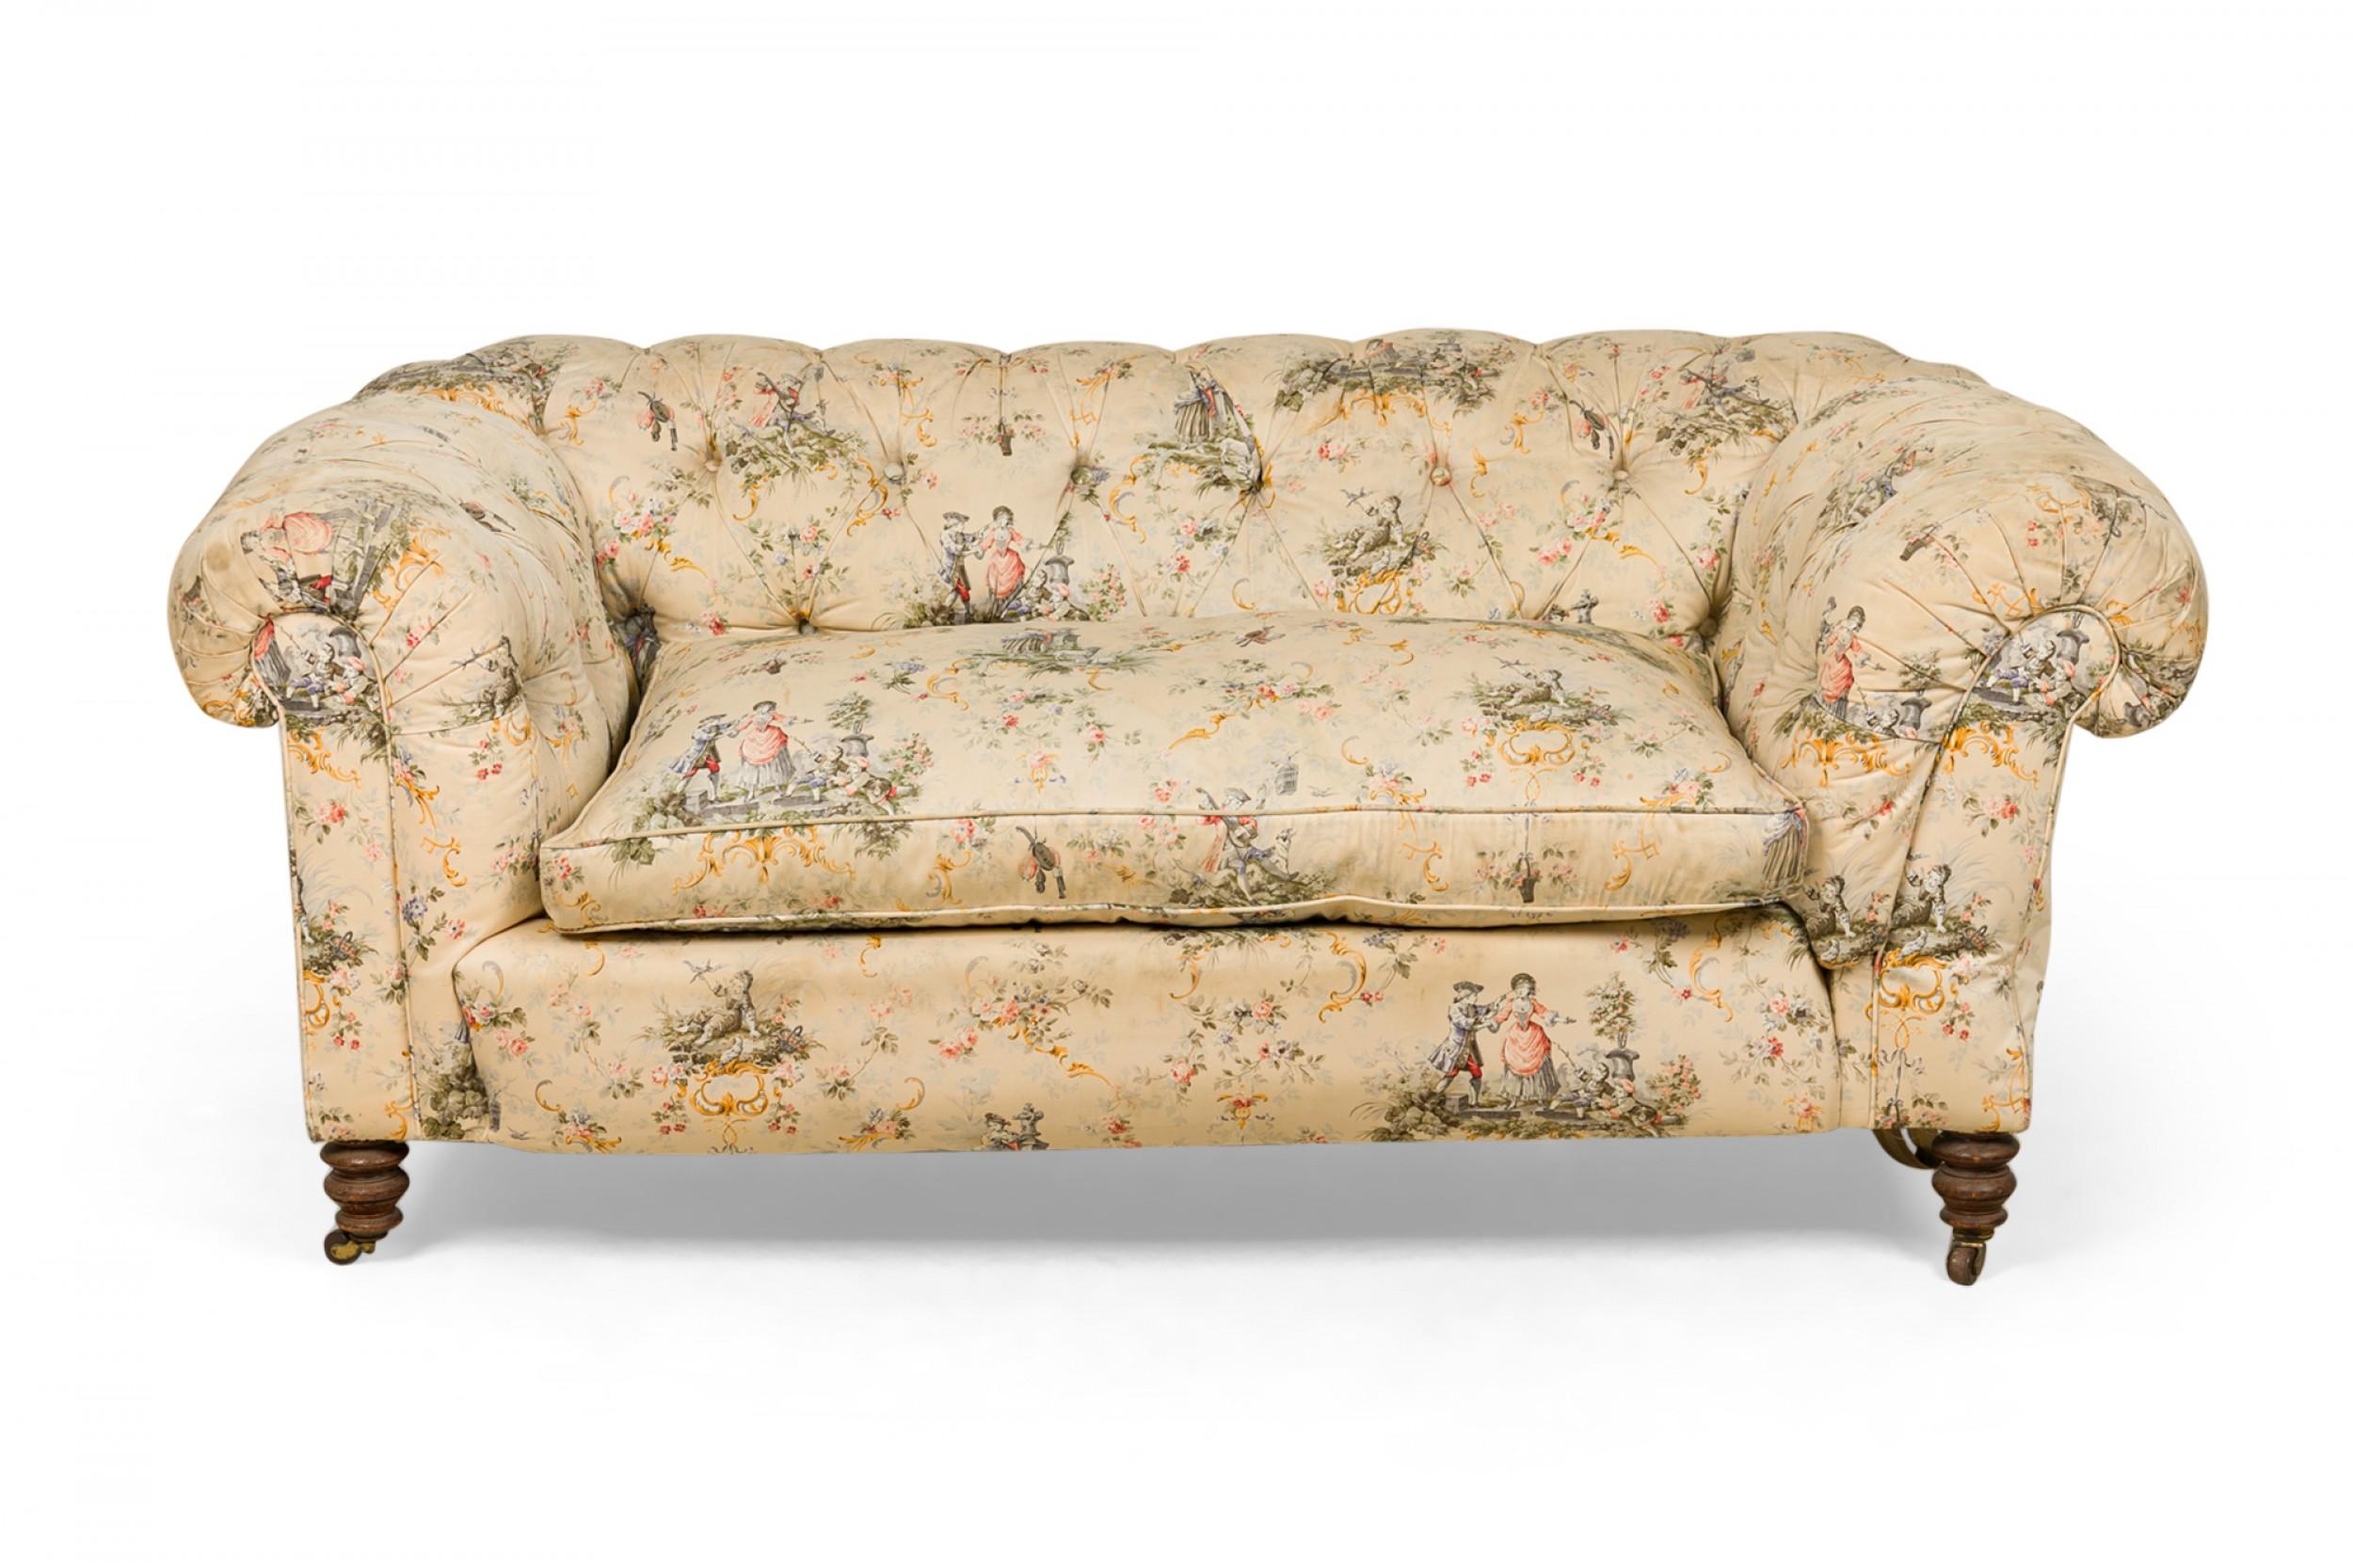 French Victorian-style loveseat upholstered in a toile print fabric with a beige background with multi-colored pastoral scenes throughout, accented with button tufting, resting on two turned mahogany front legs and two square carved back legs, all